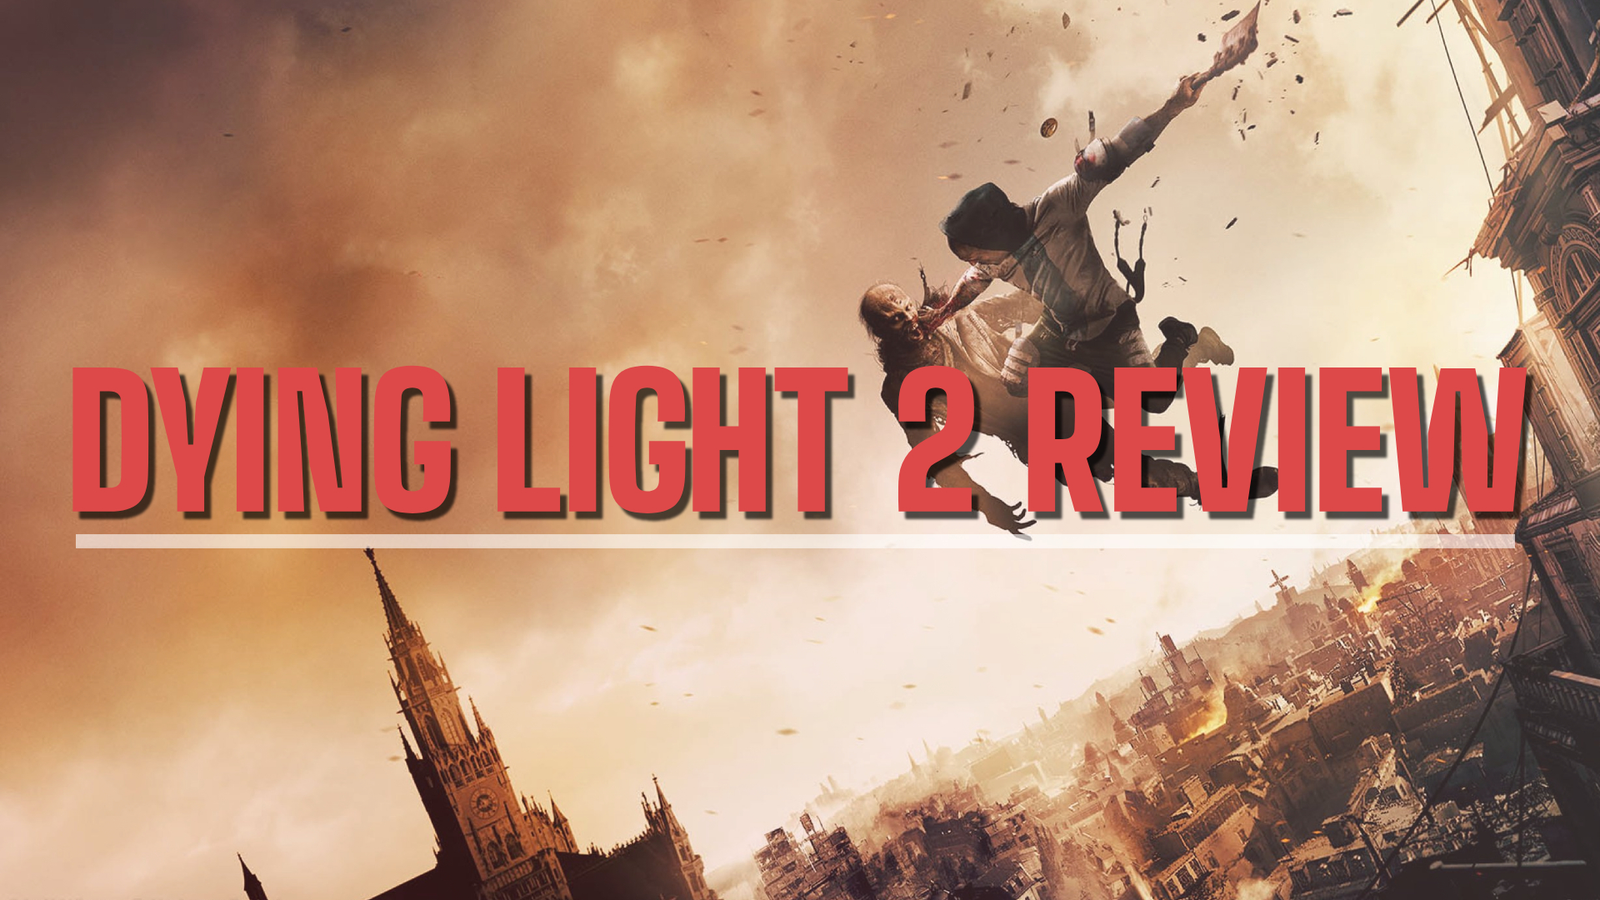 Dying Light 2 review: Outstanding gameplay props up an incomplete story -  Polygon